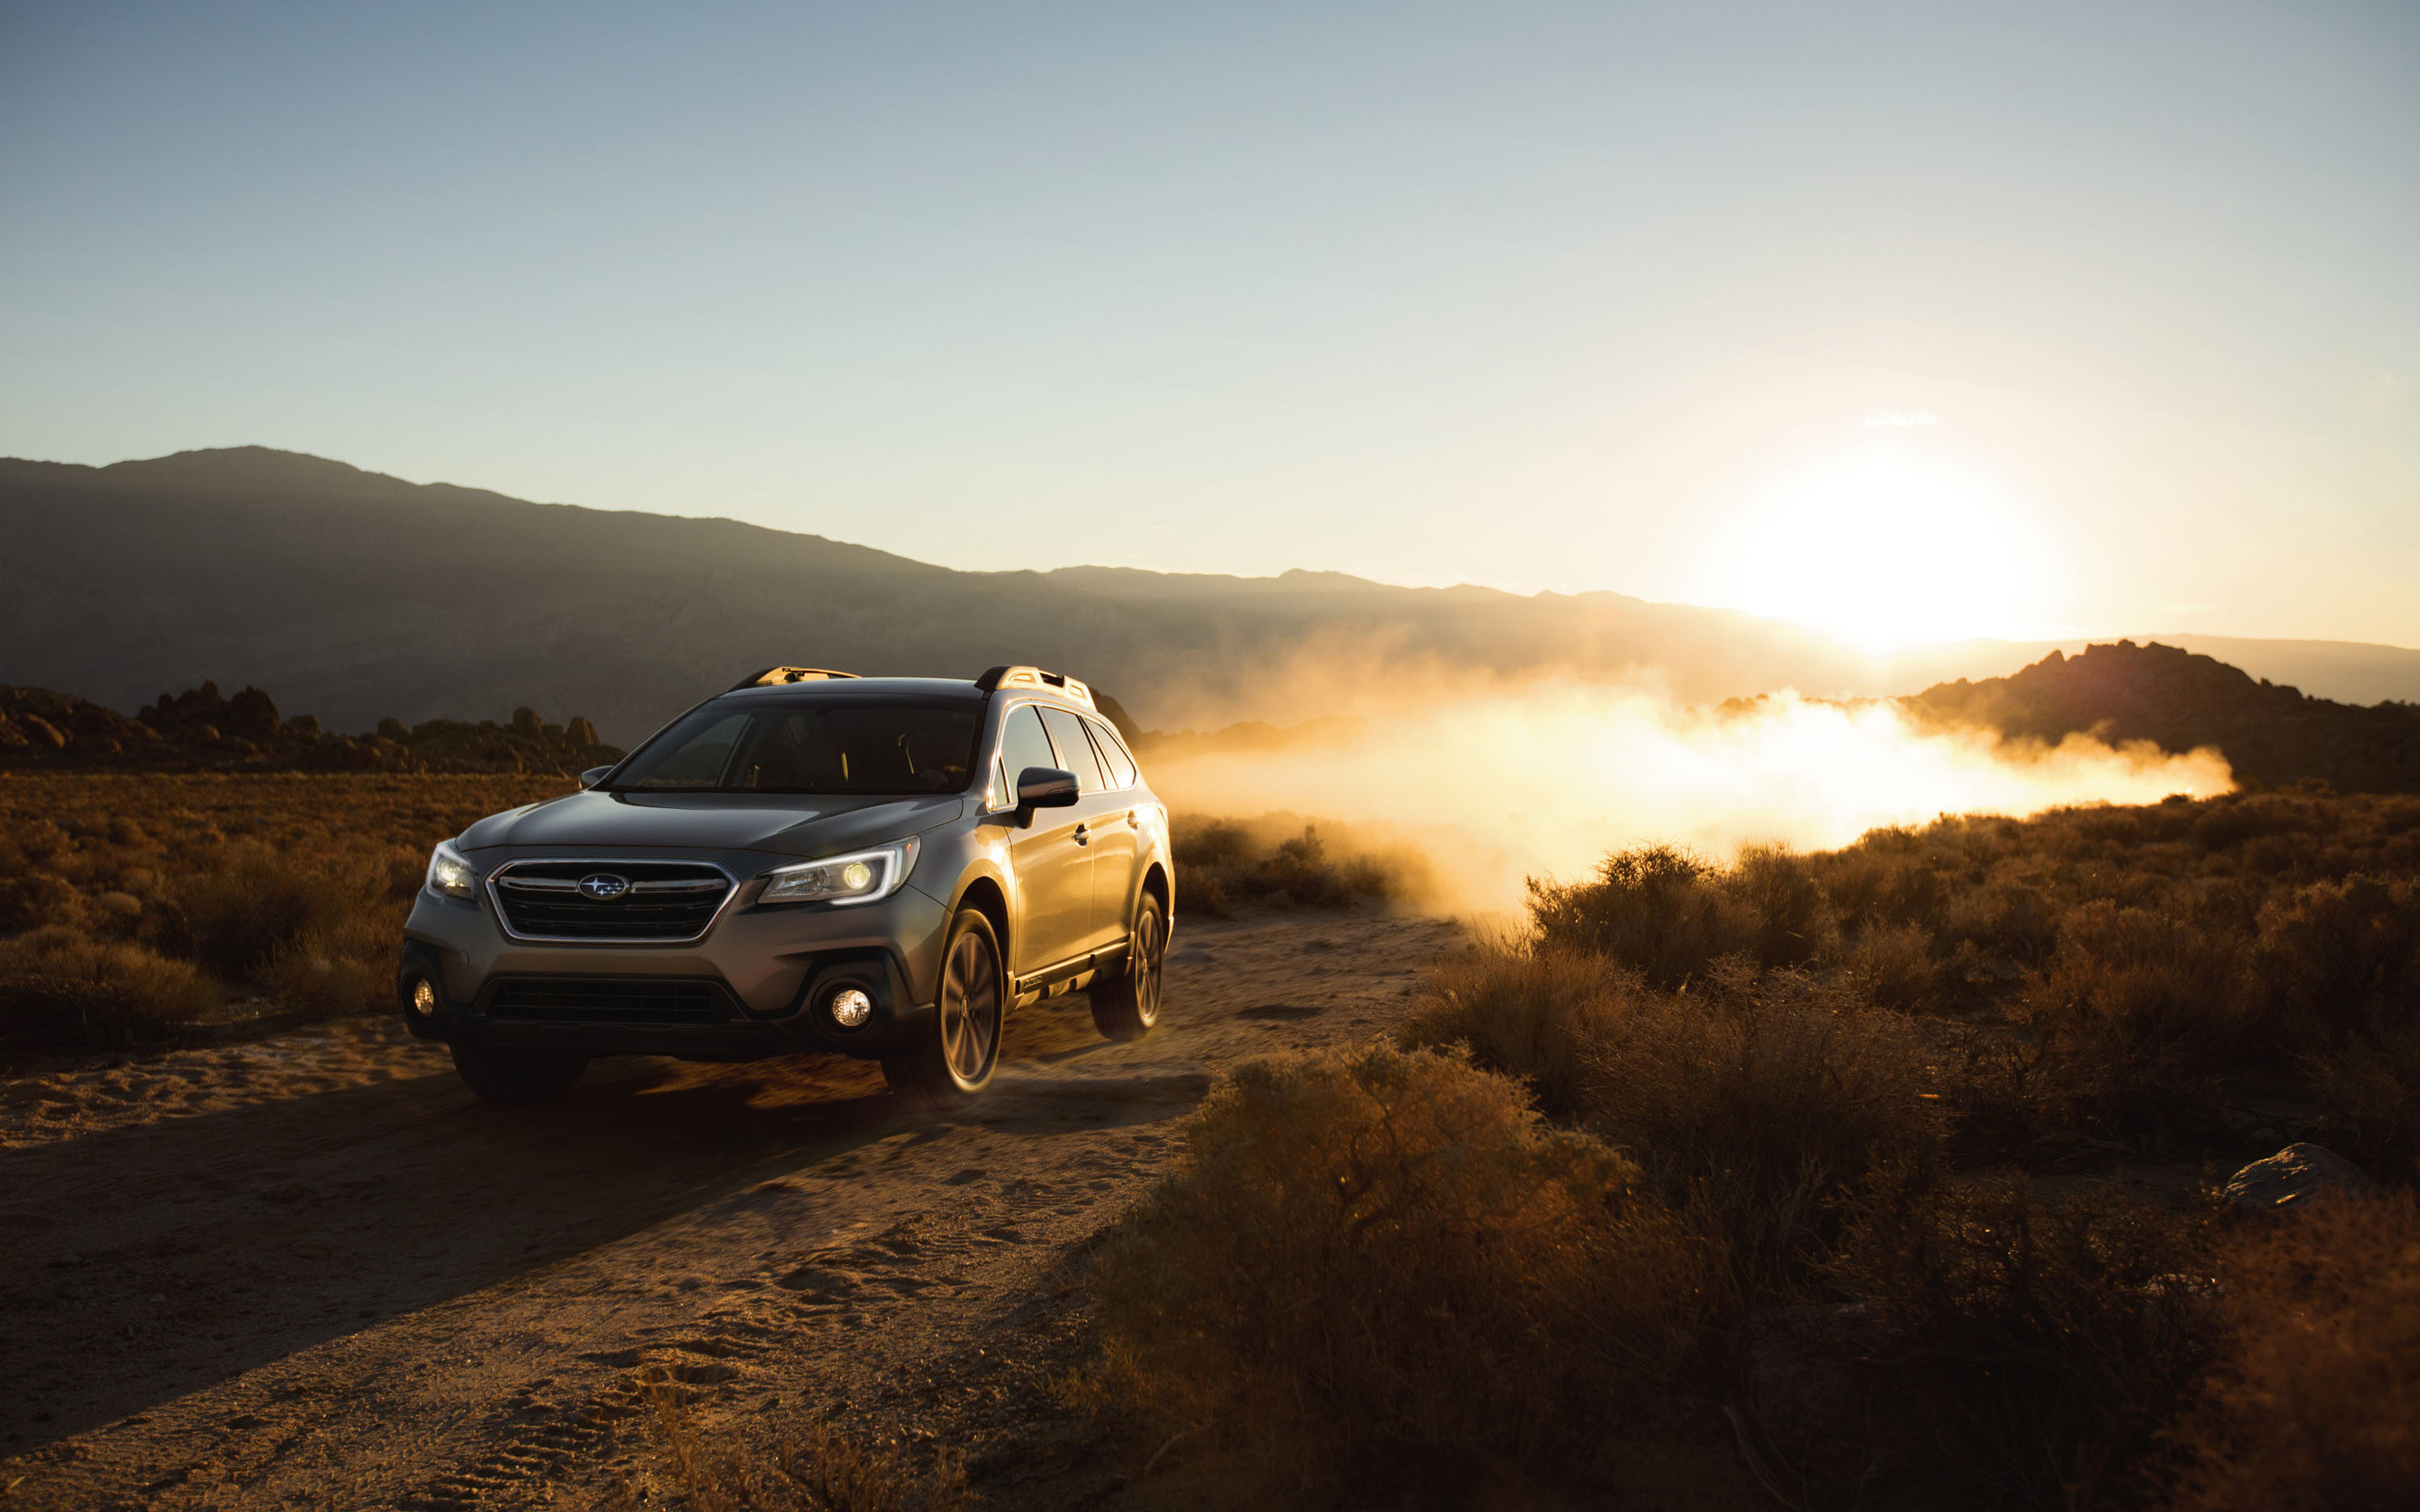 Subaru Outback, Offroad version, Sunset view, High-quality pictures, 2880x1800 HD Desktop